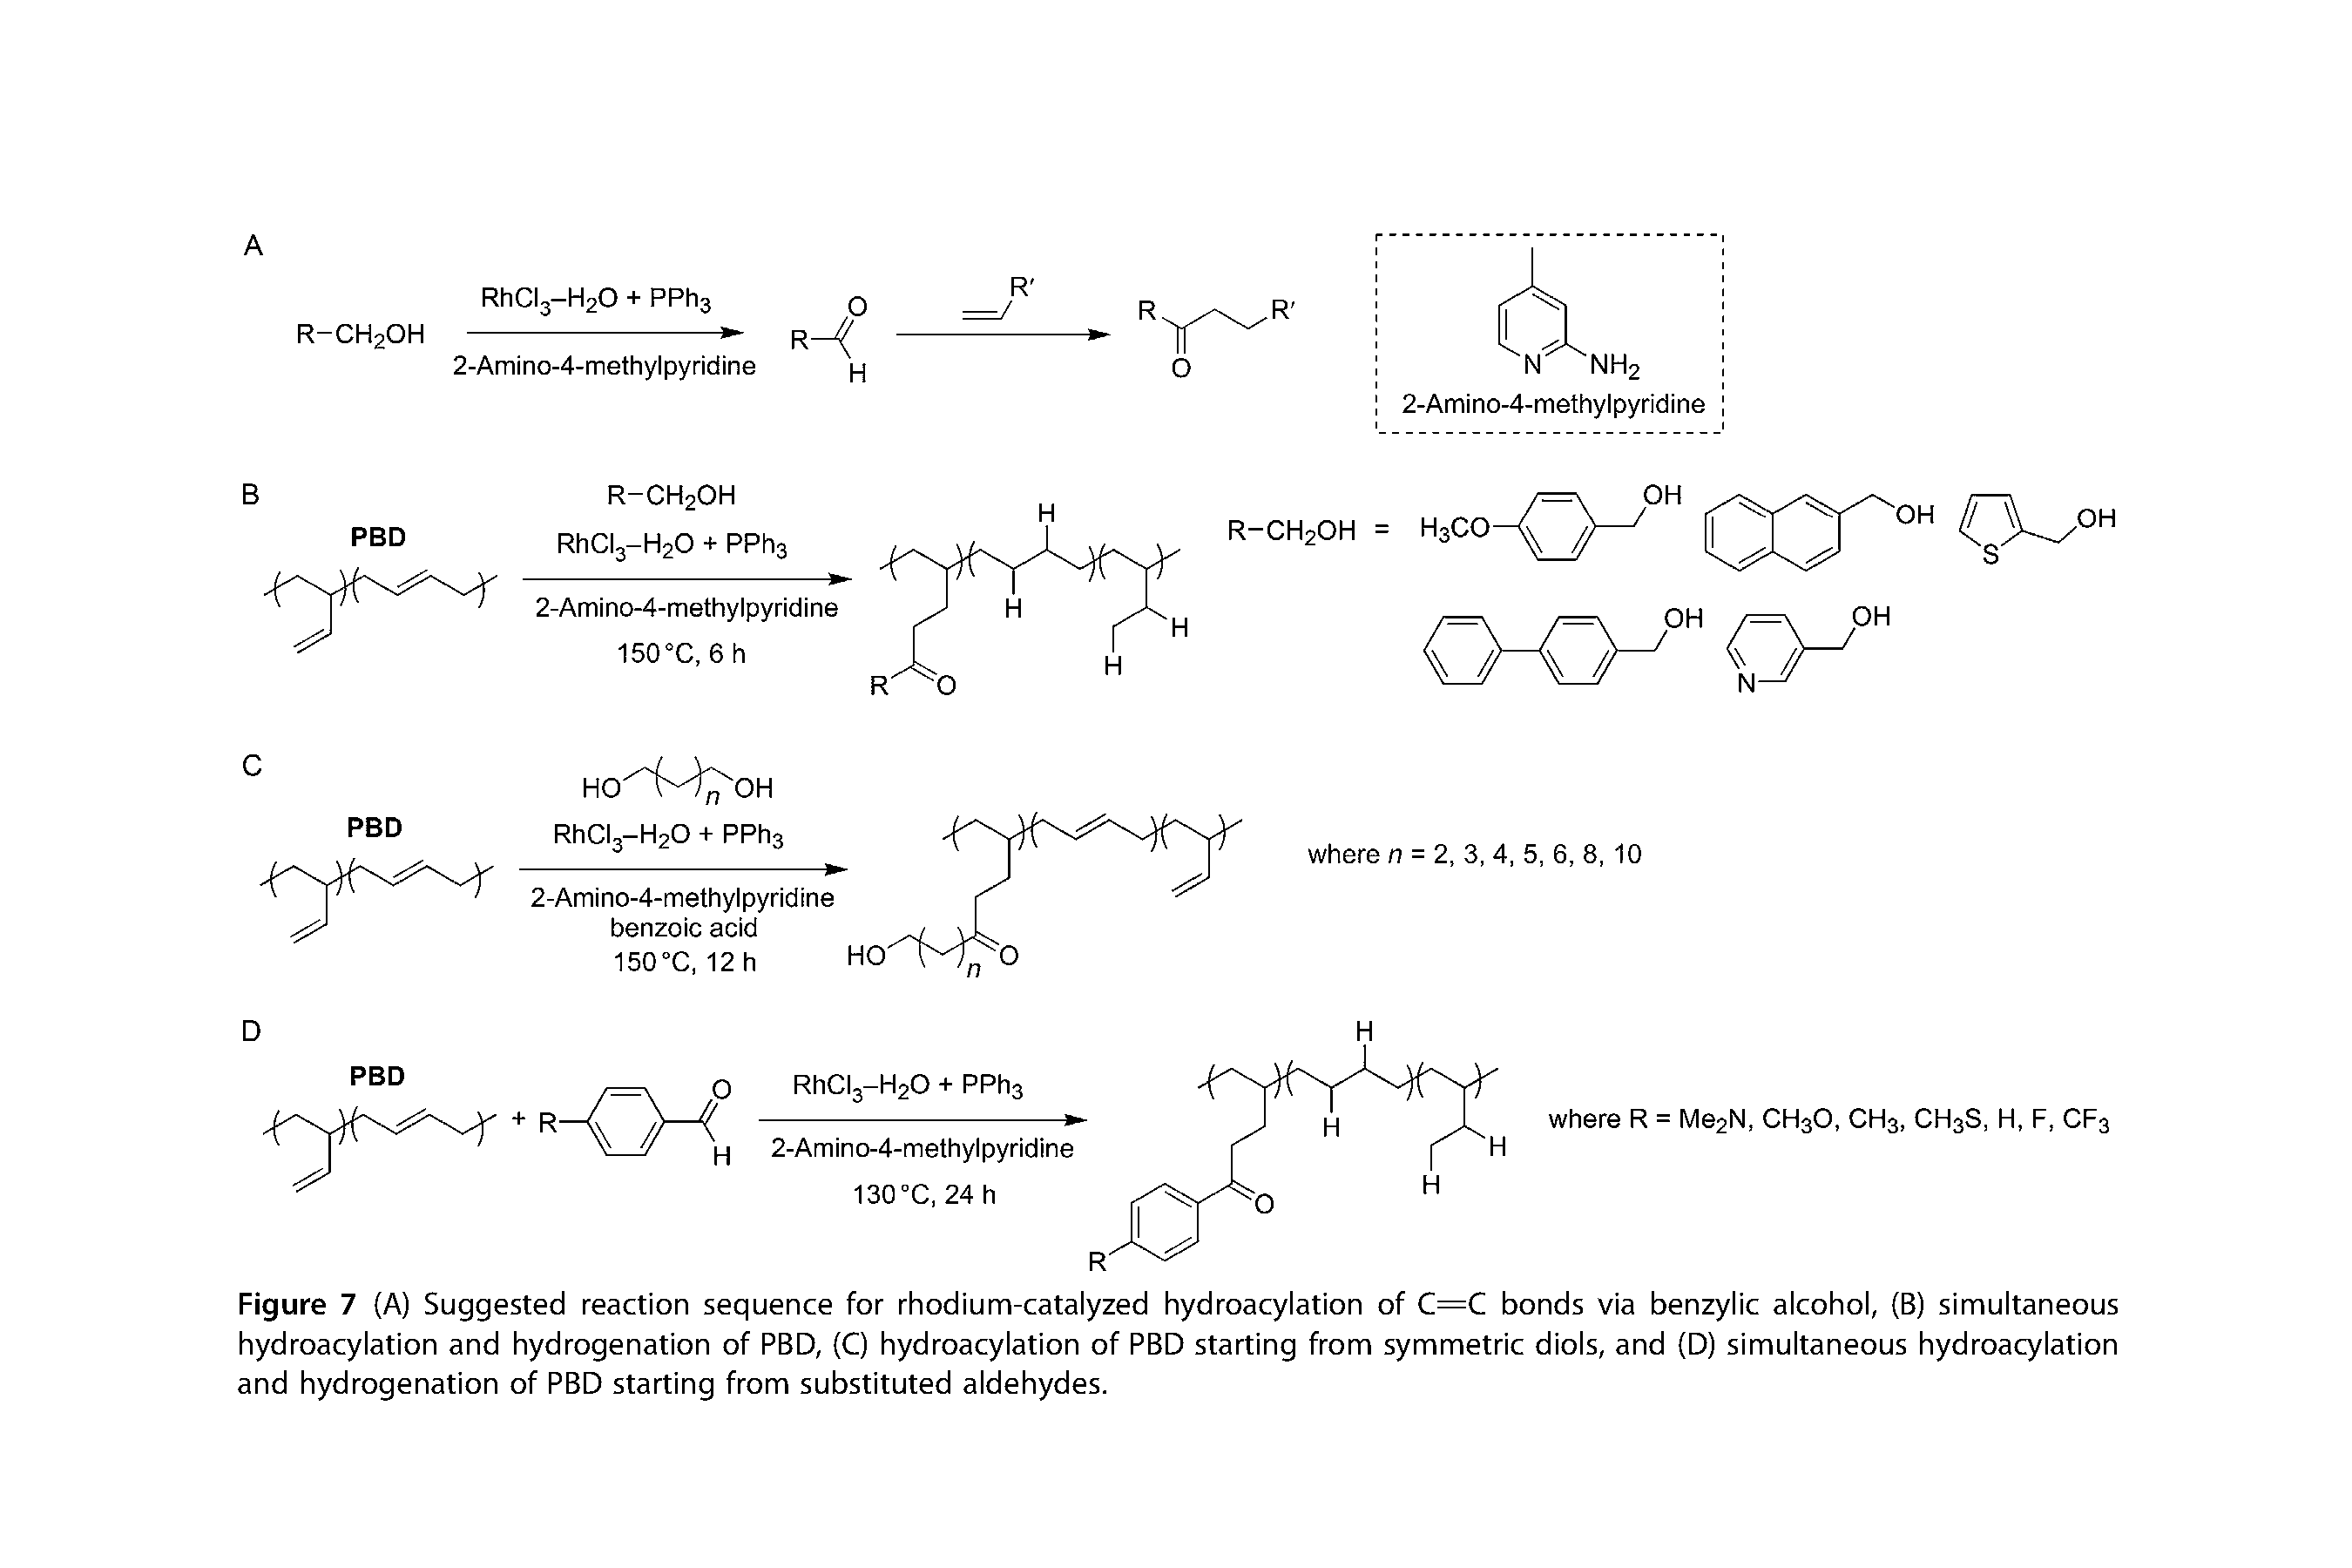 Figure 7 (A) Suggested reaction sequence for rhodium-catalyzed hydroacylation of C=C bonds via benzylic alcohol, (B) simultaneous hydroacylation and hydrogenation of PBD, (C) hydroacylation of PBD starting from symmetric diols, and (D) simultaneous hydroacylation and hydrogenation of PBD starting from substituted aldehydes.